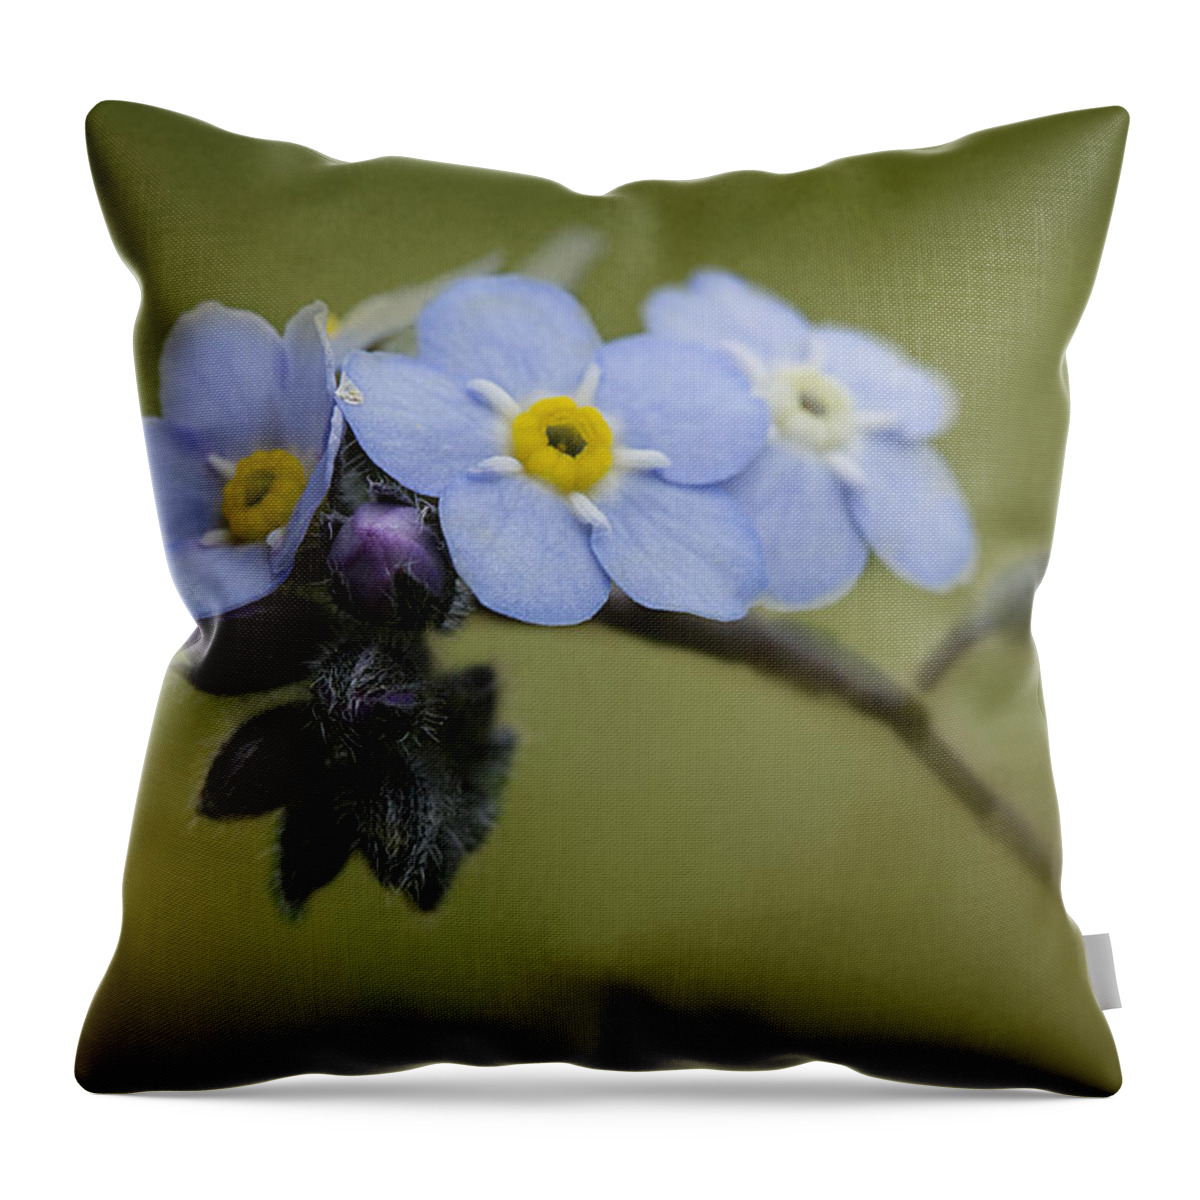 Unforgettable Throw Pillow featuring the photograph Unforgettable by Morgan Wright